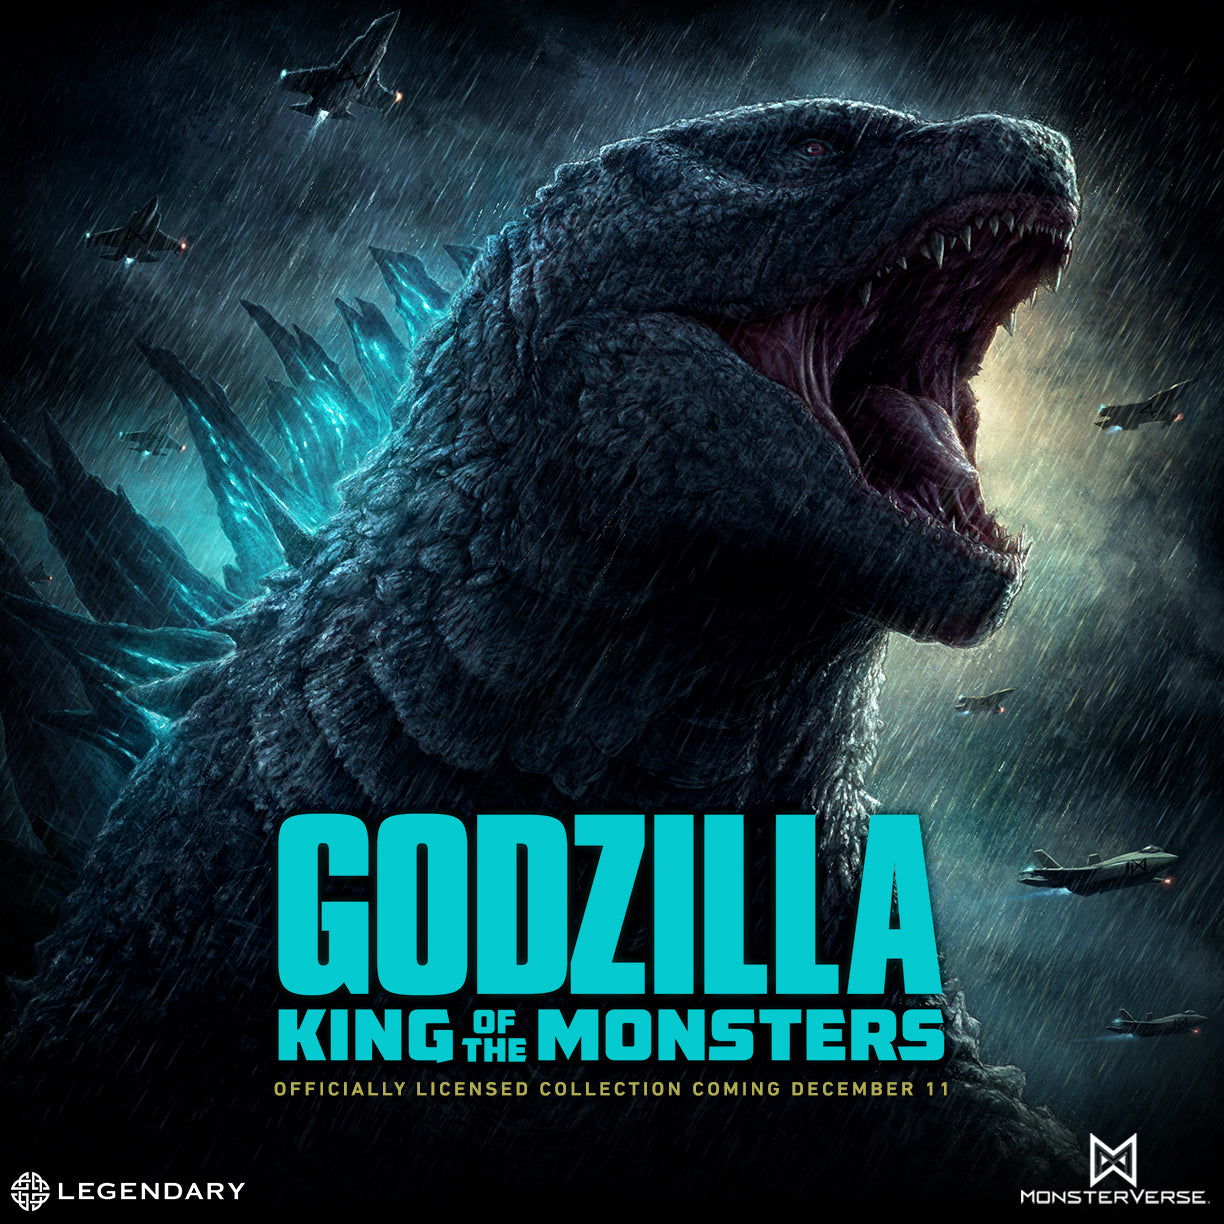 GODZILLA KING OF THE MONSTERS